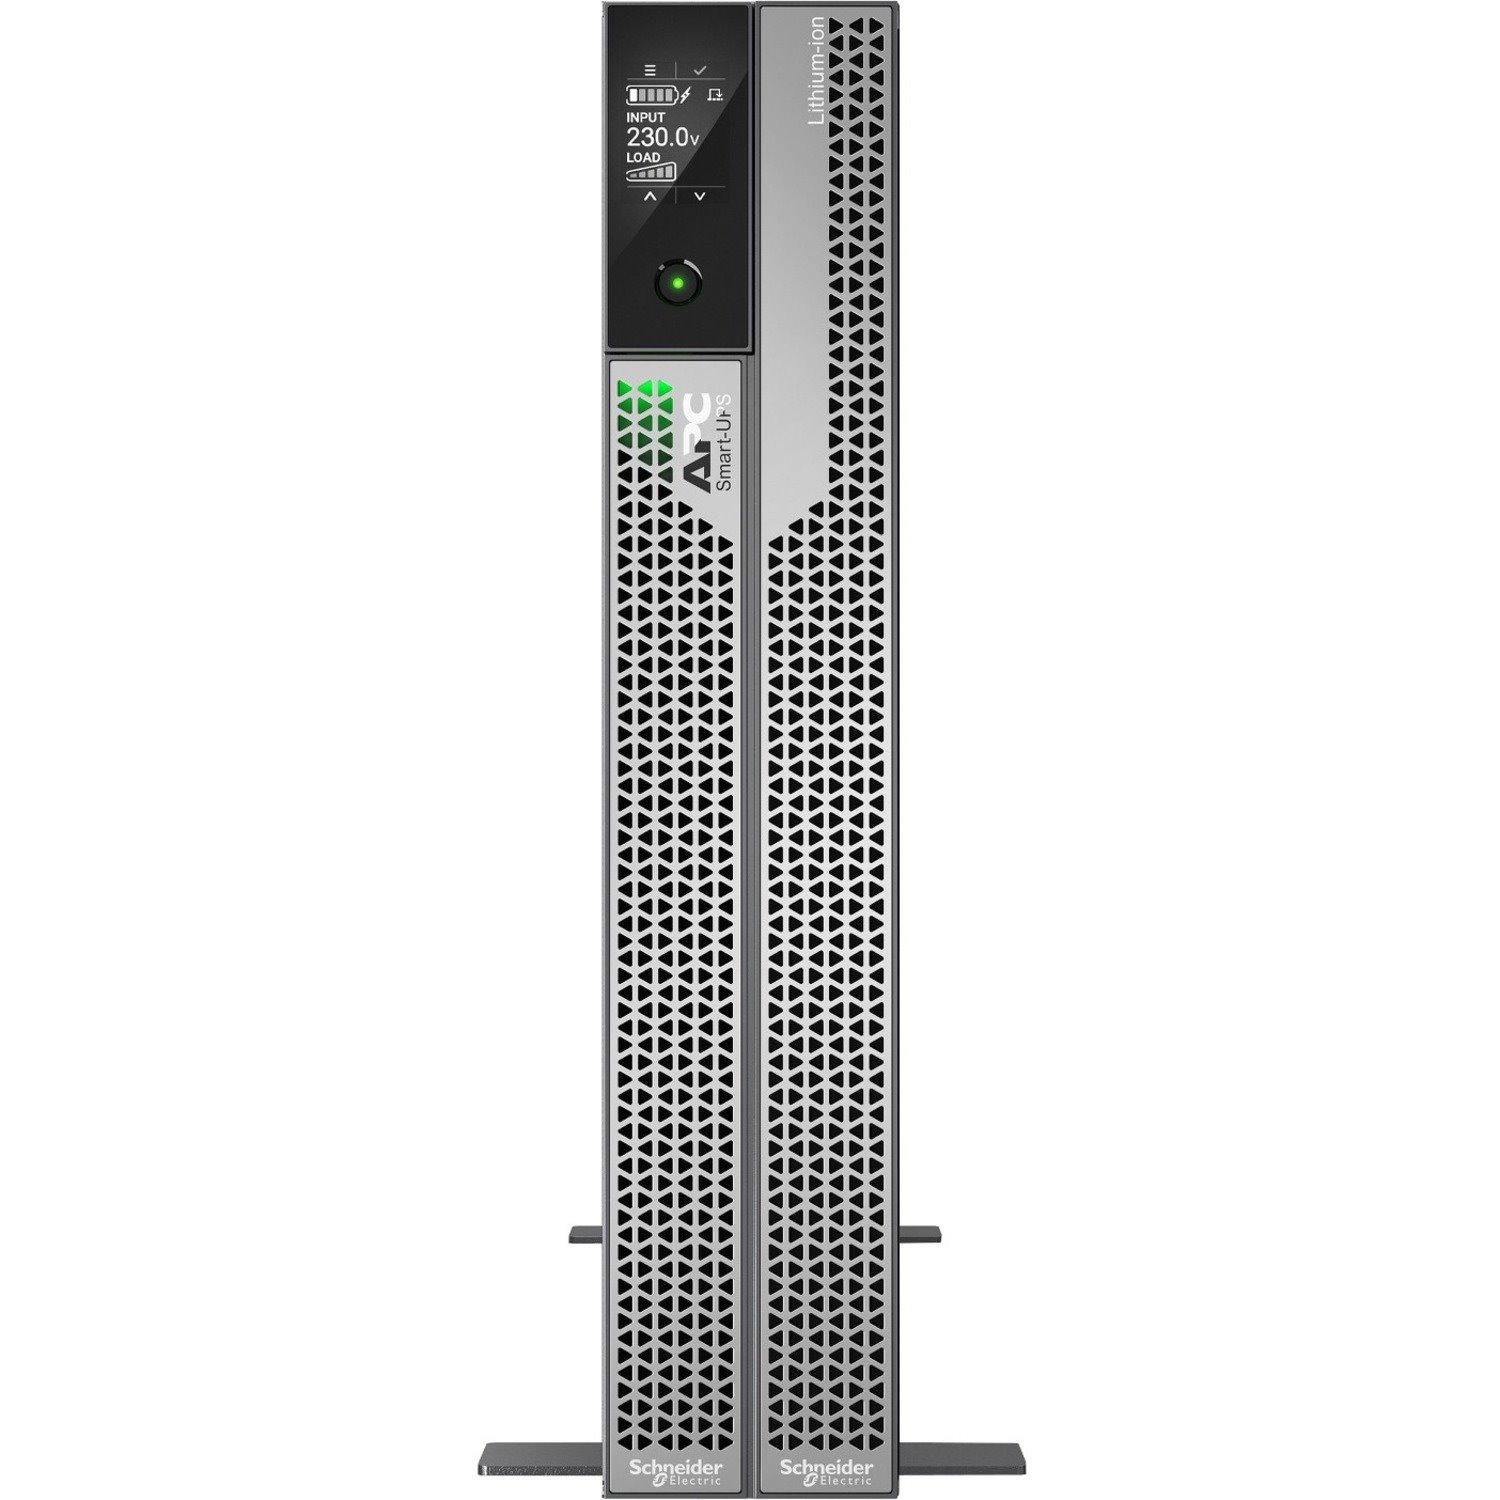 APC by Schneider Electric Smart-UPS Ultra On-Line Lithium ion, 5KVA/5KW, 2U Rack/Tower, 230V